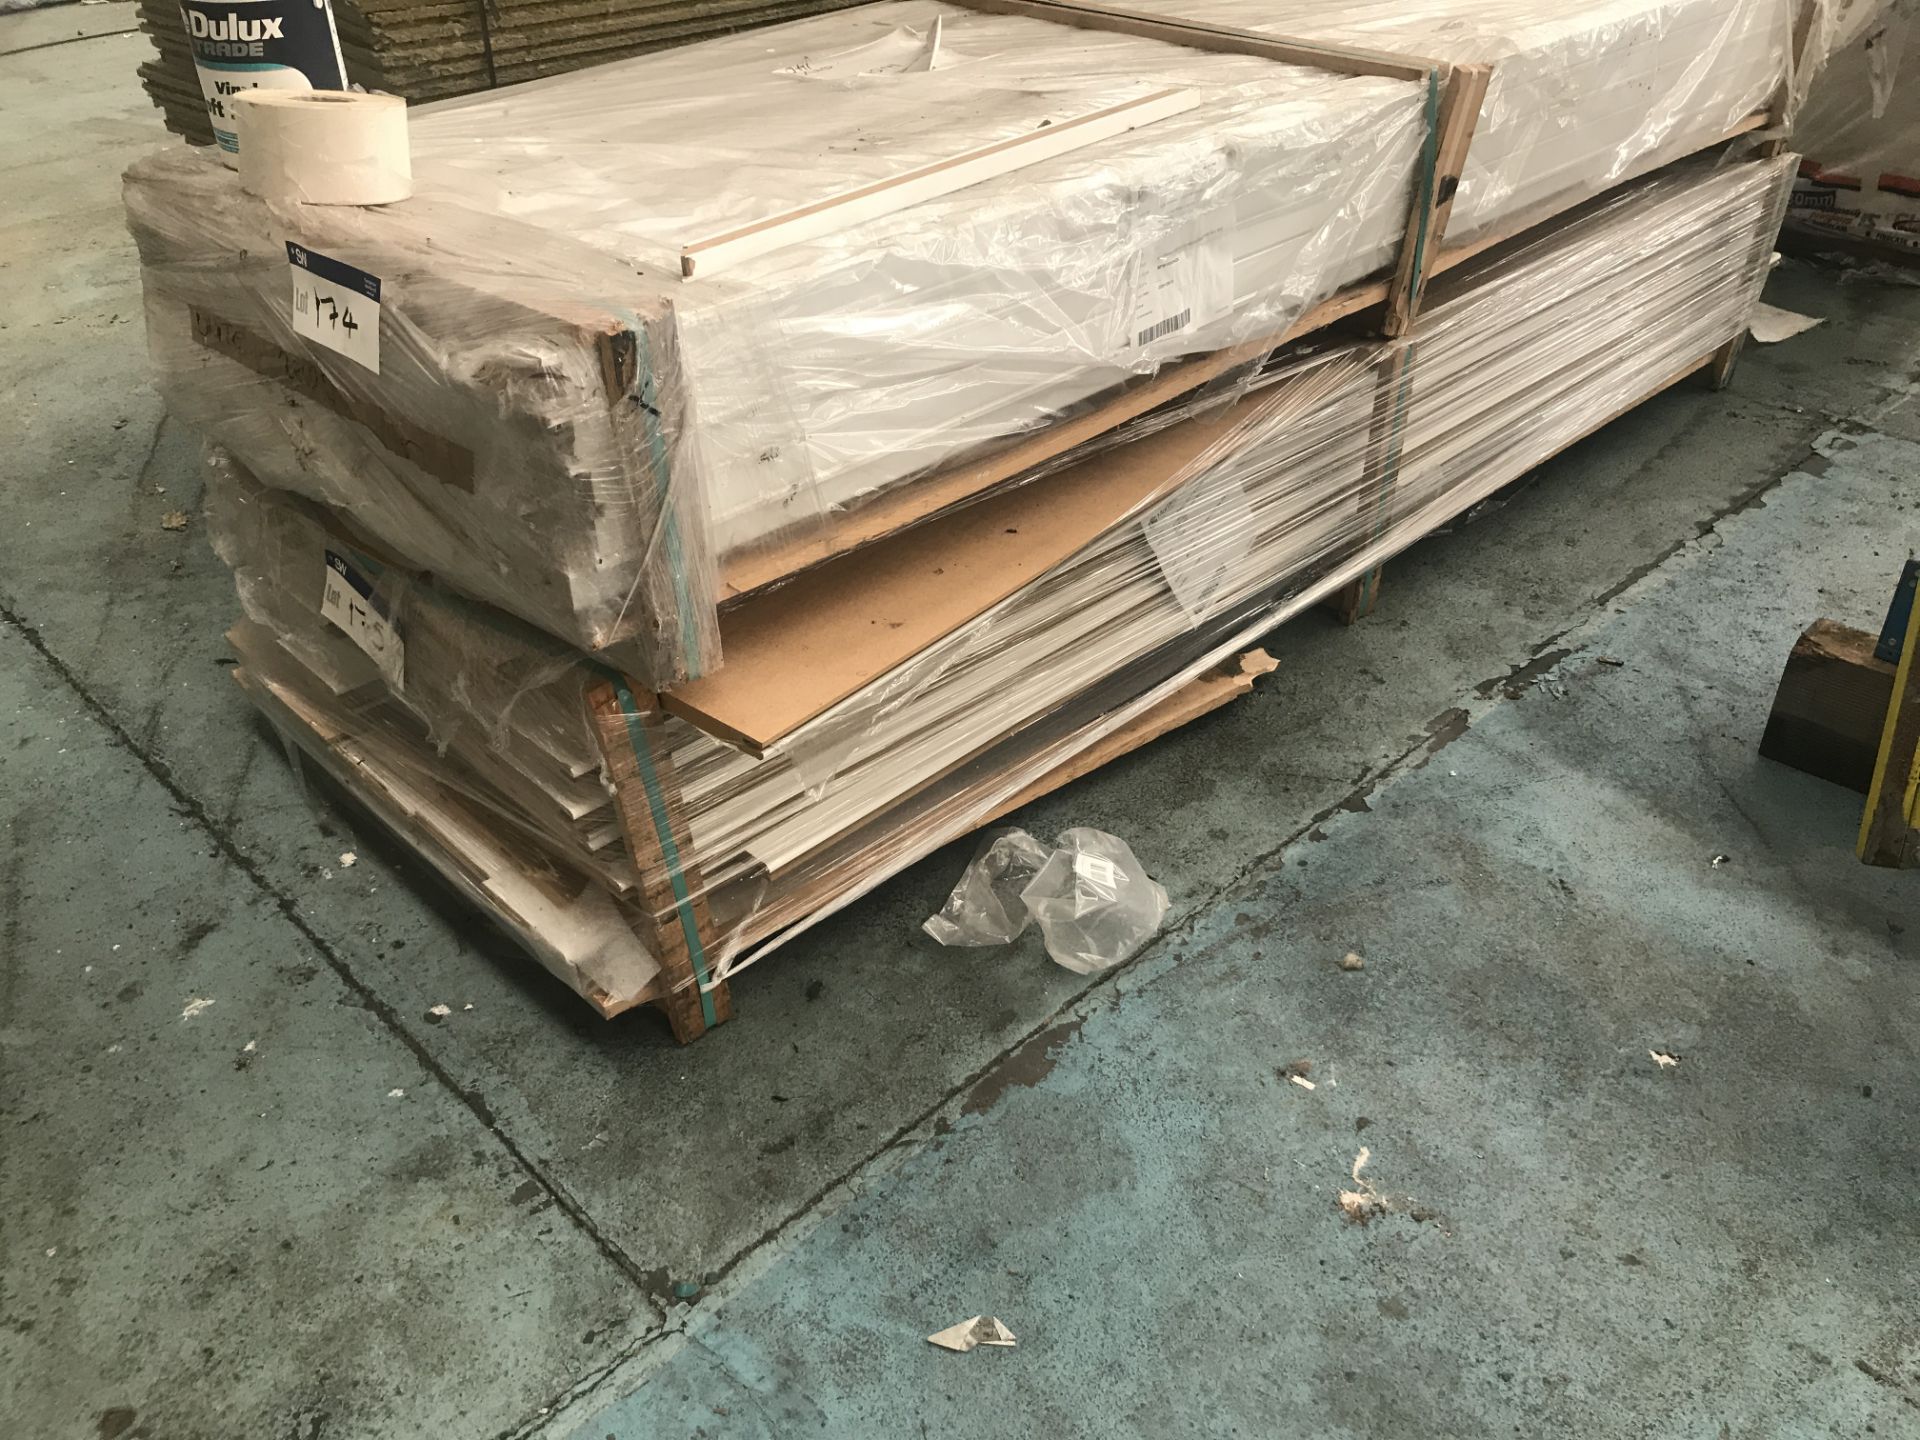 White Architrave, approx. 3m long, as set out on bottom pallet